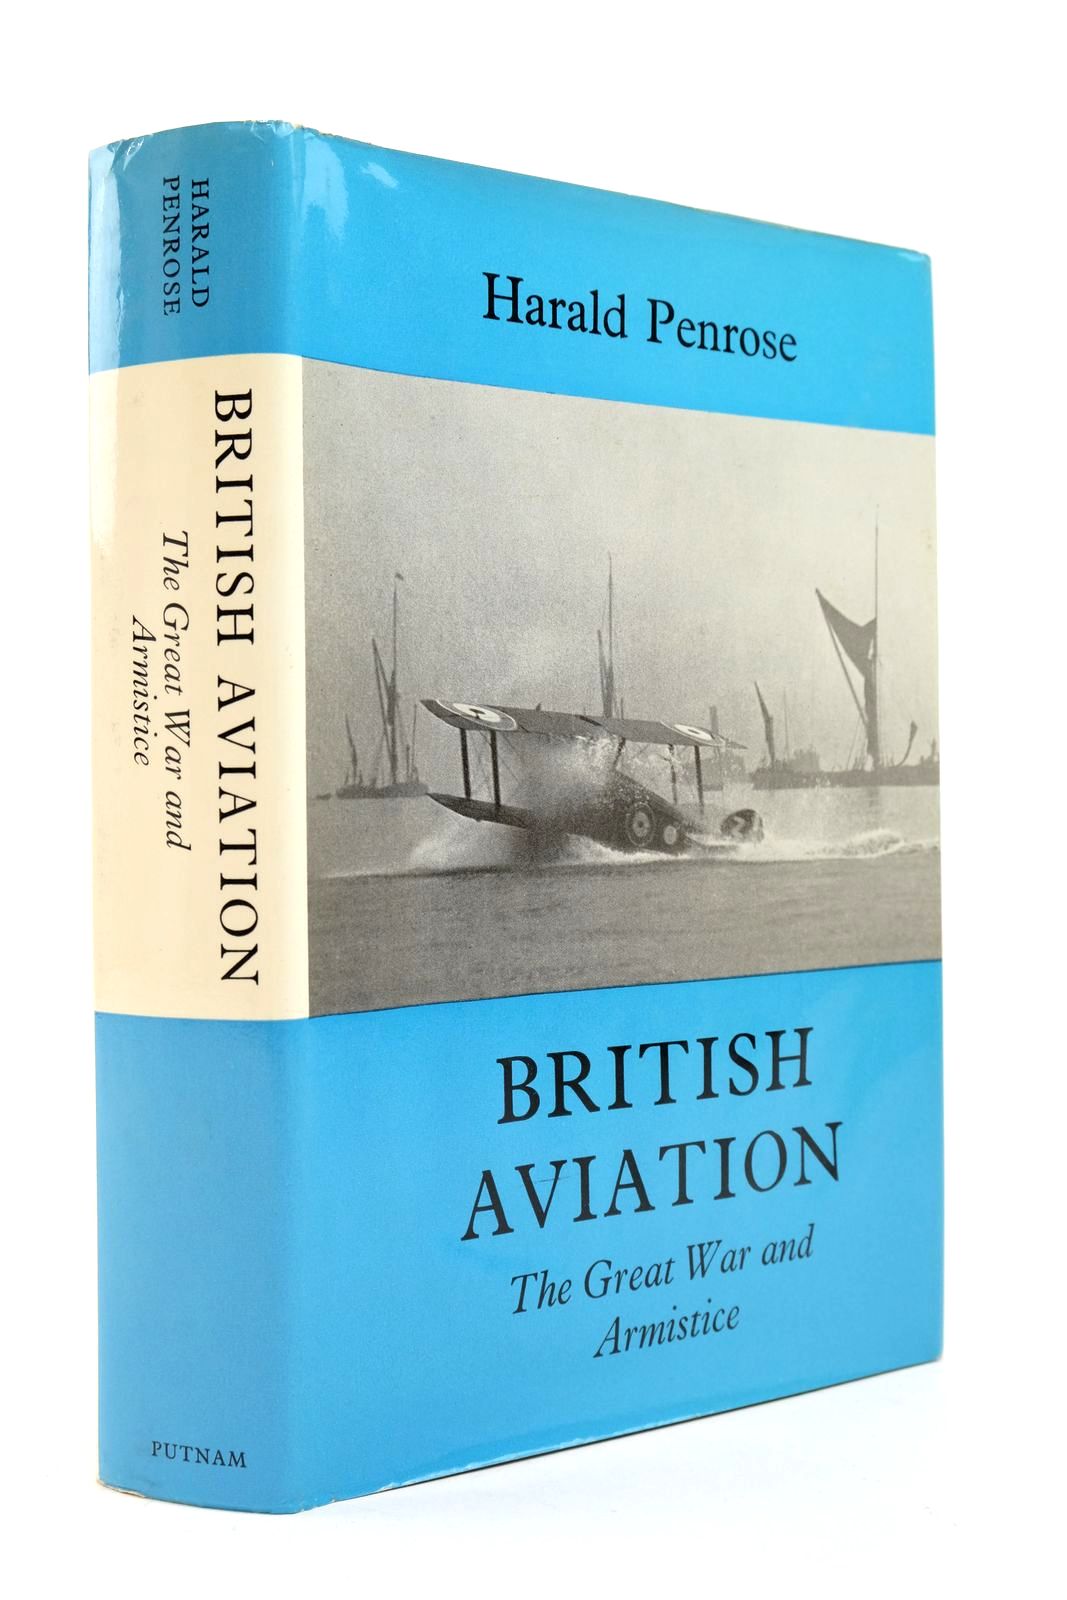 Photo of BRITISH AVIATION: THE GREAT WAR AND ARMISTICE 1915-1919 written by Penrose, Harald published by Putnam (STOCK CODE: 2139235)  for sale by Stella & Rose's Books